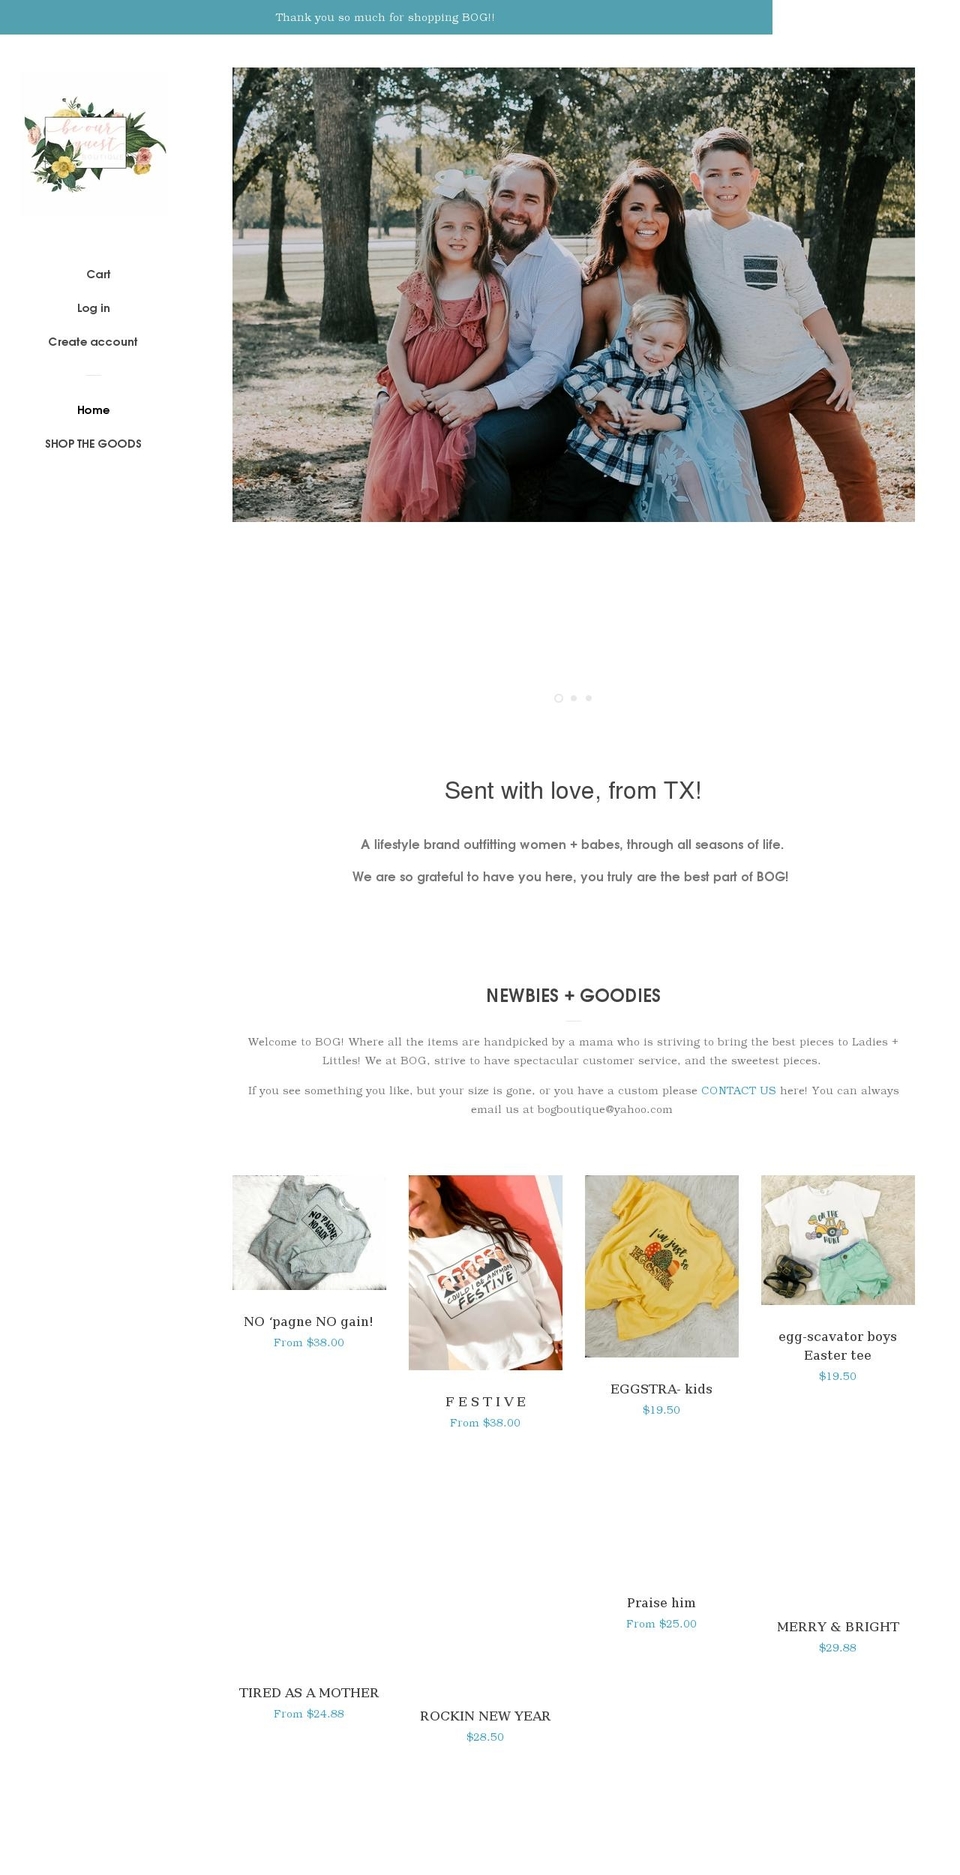 Pop with Installments message Shopify theme site example beourguestboutique.com